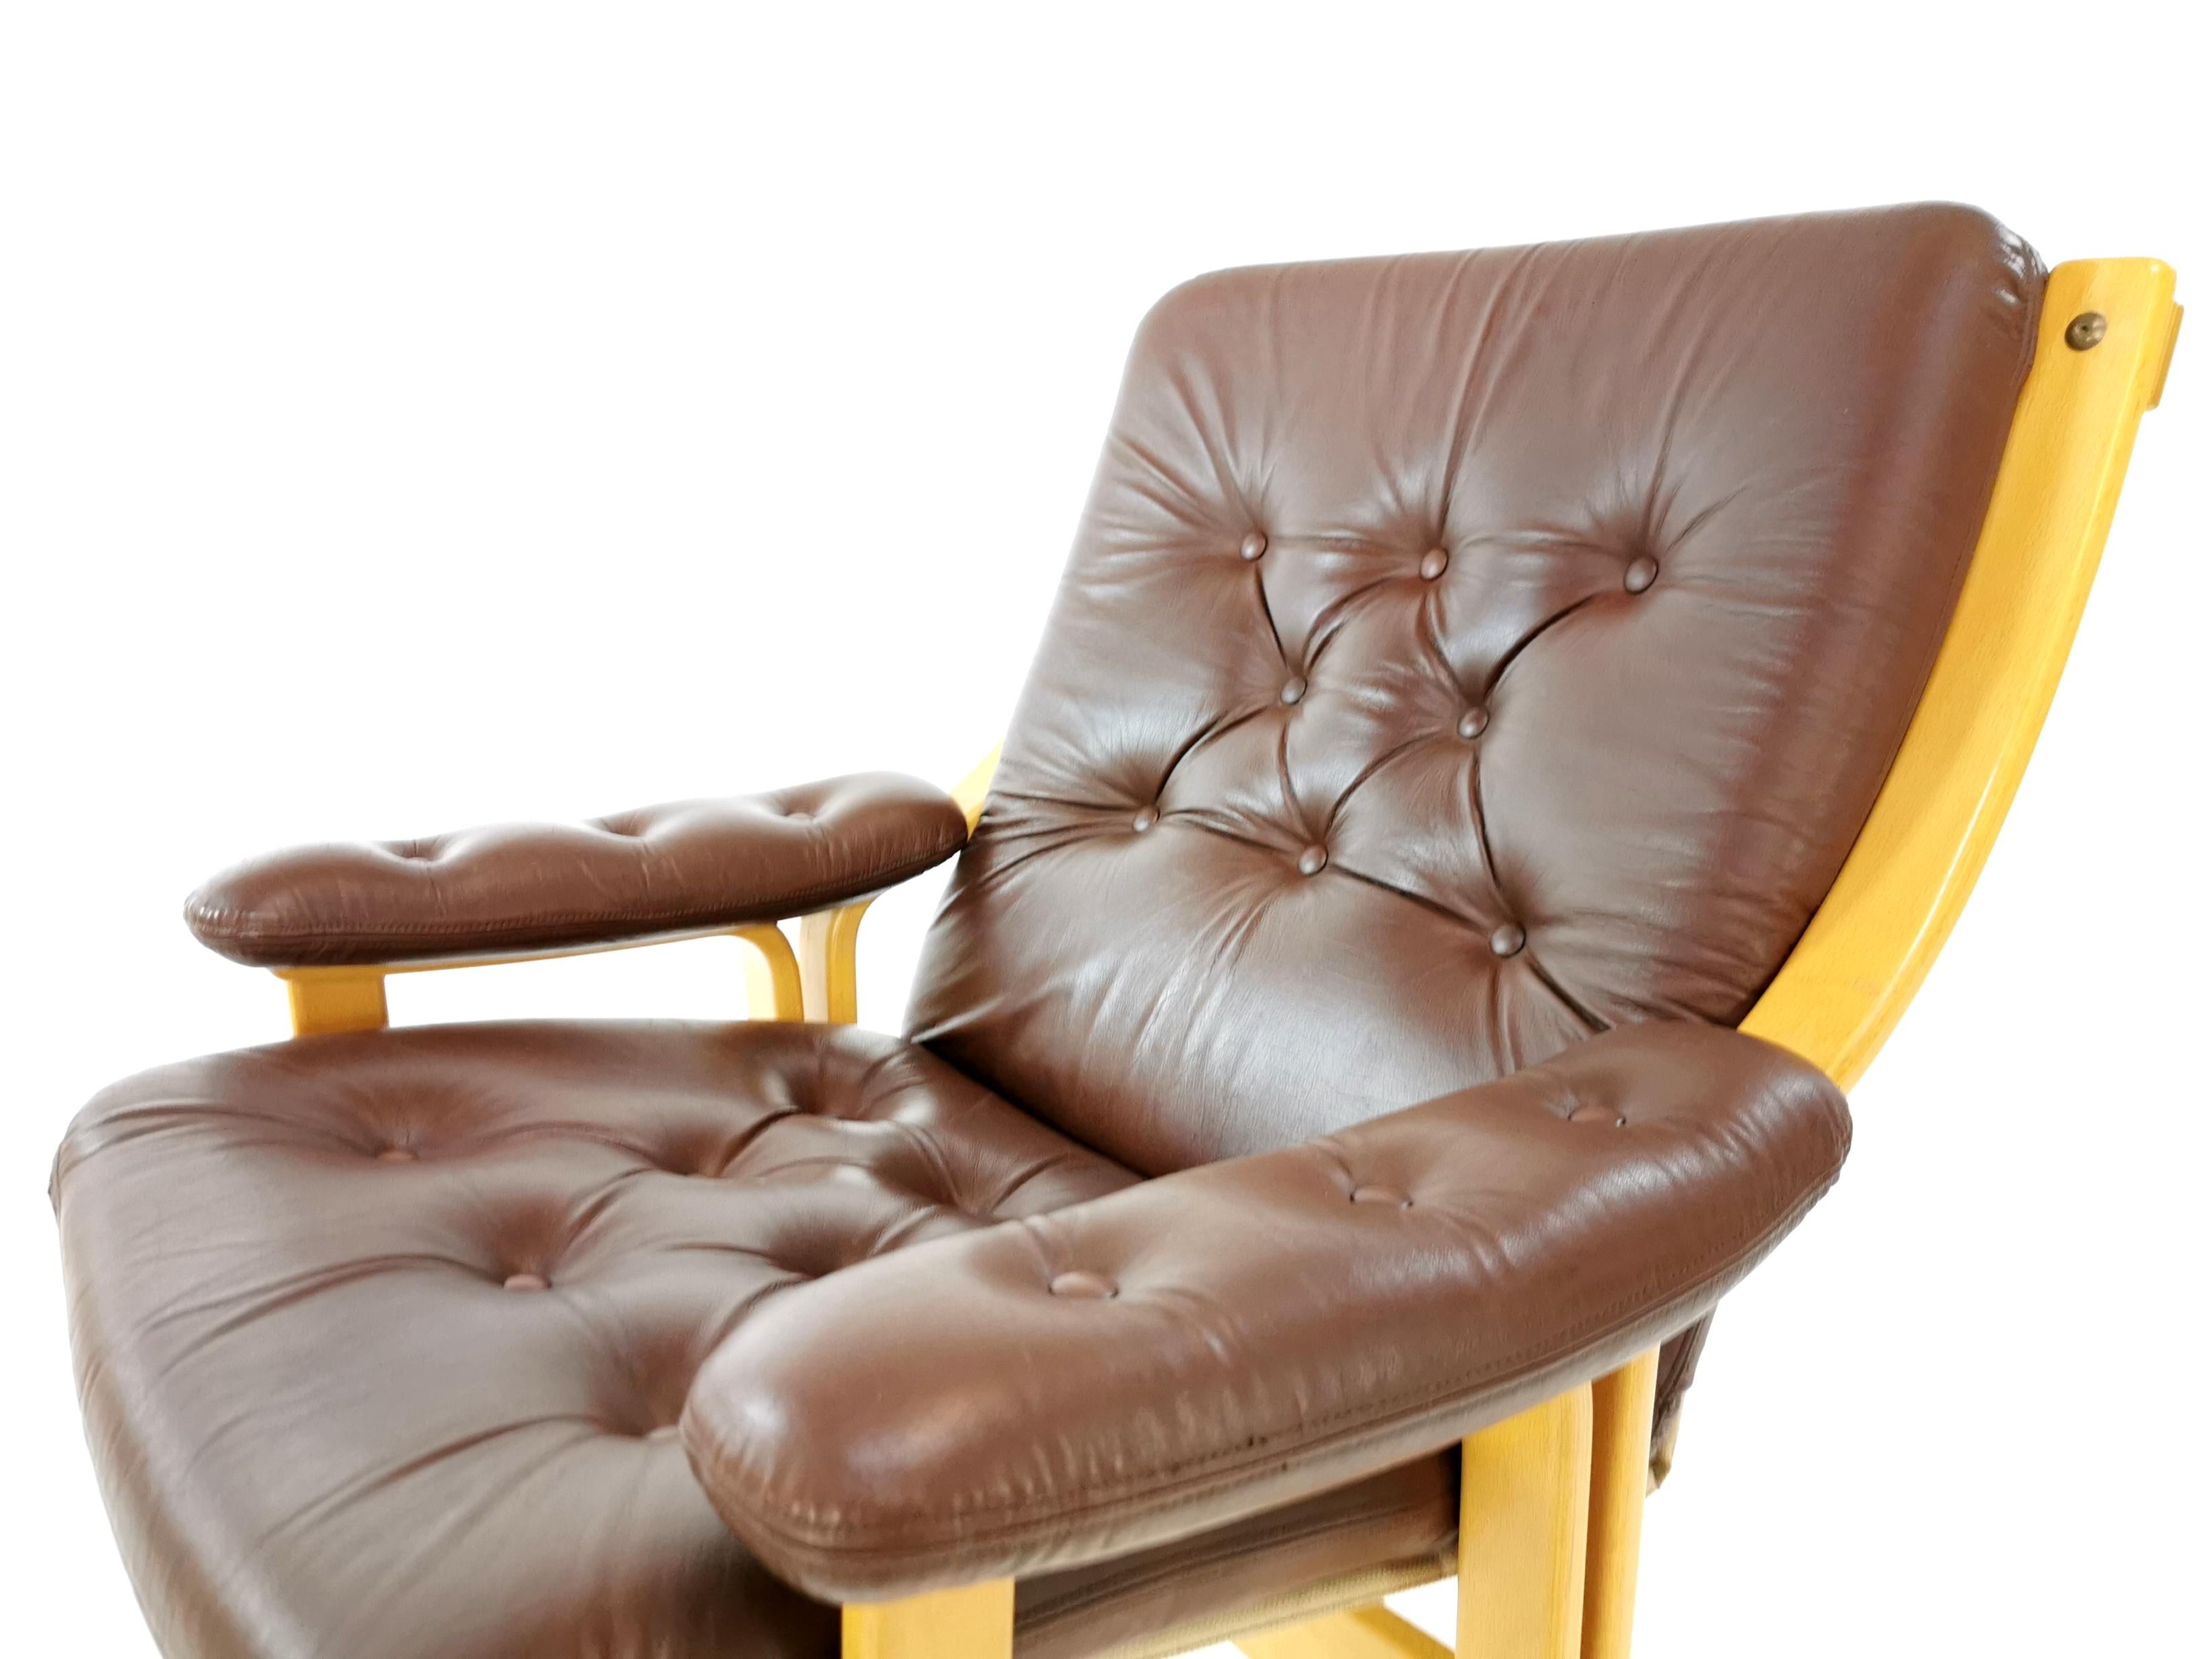 Ekornes leather armchair.
Ekornes are principally known for its luxury line of armchairs and sofas.
Norwegian, circa 1970s. Made with leather and bentwood.